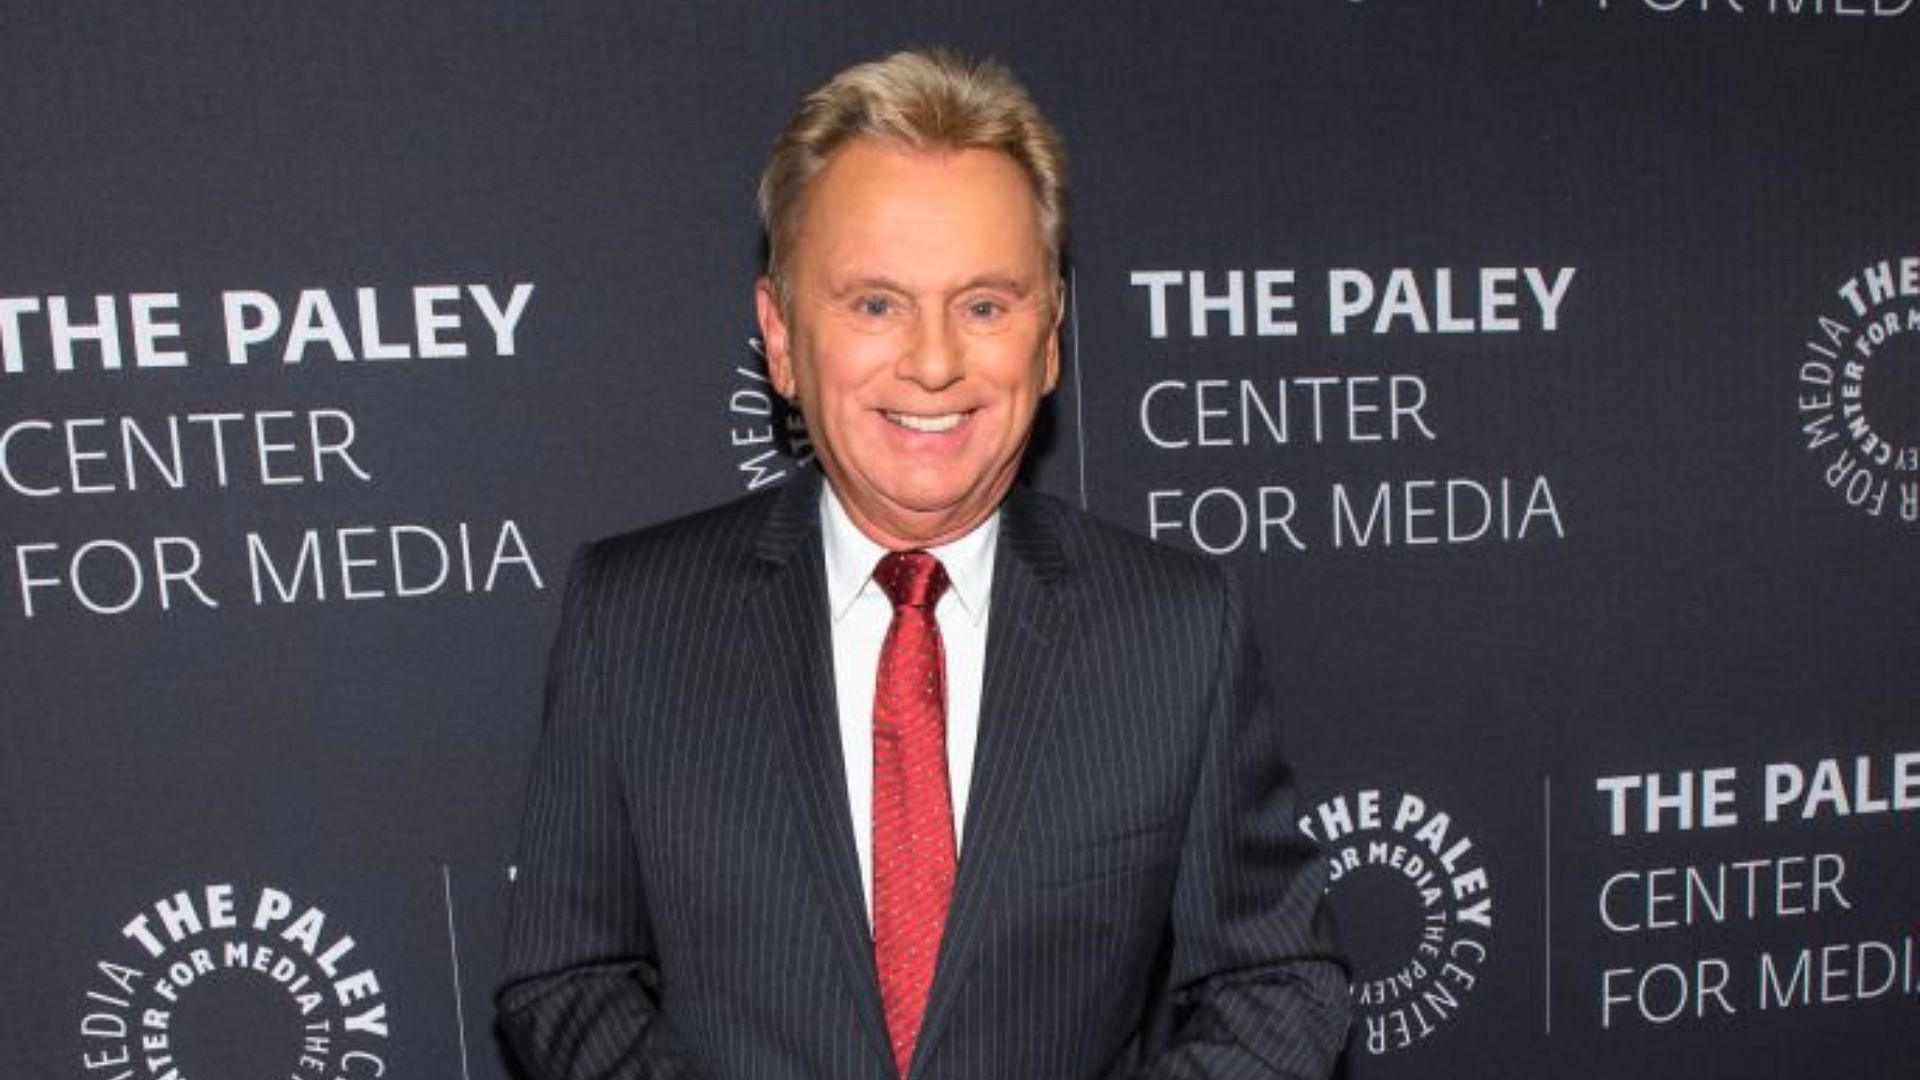 Pat Sajak from Wheel of Fortune